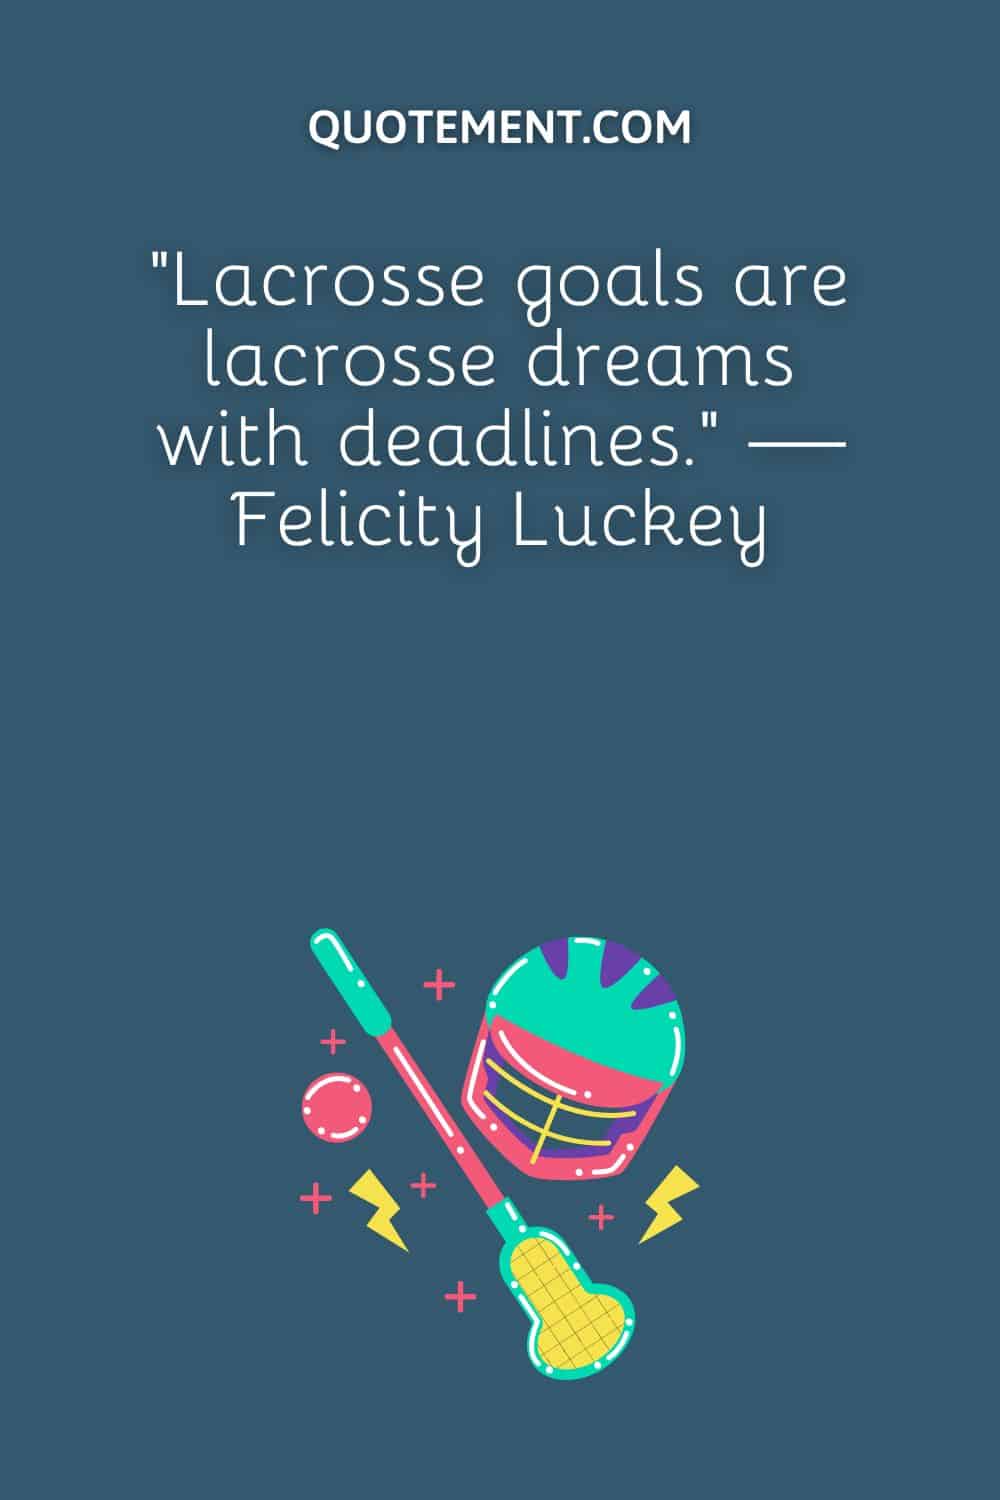 “Lacrosse goals are lacrosse dreams with deadlines.” — Felicity Luckey